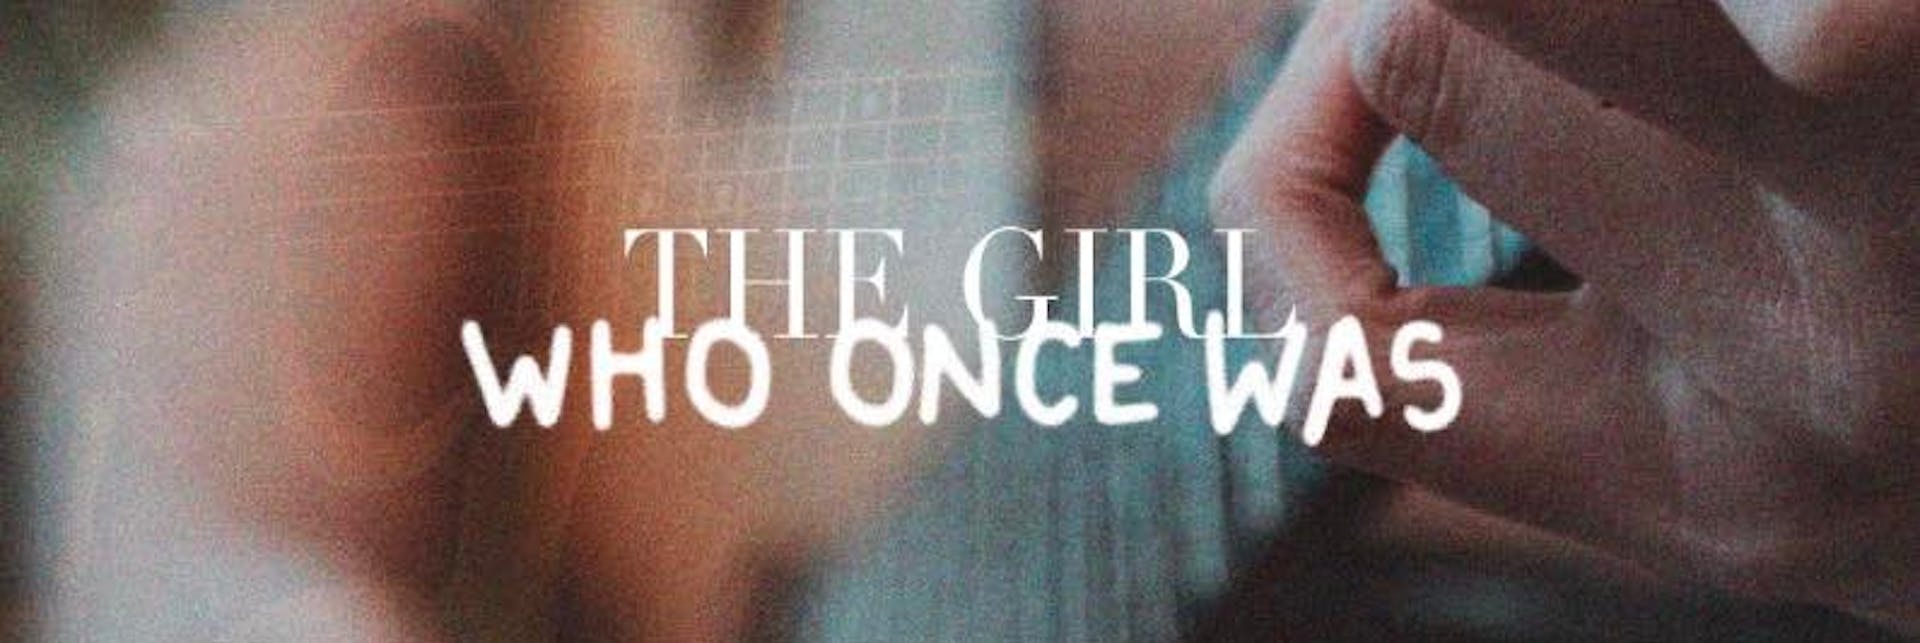 The Girl Who Once Was